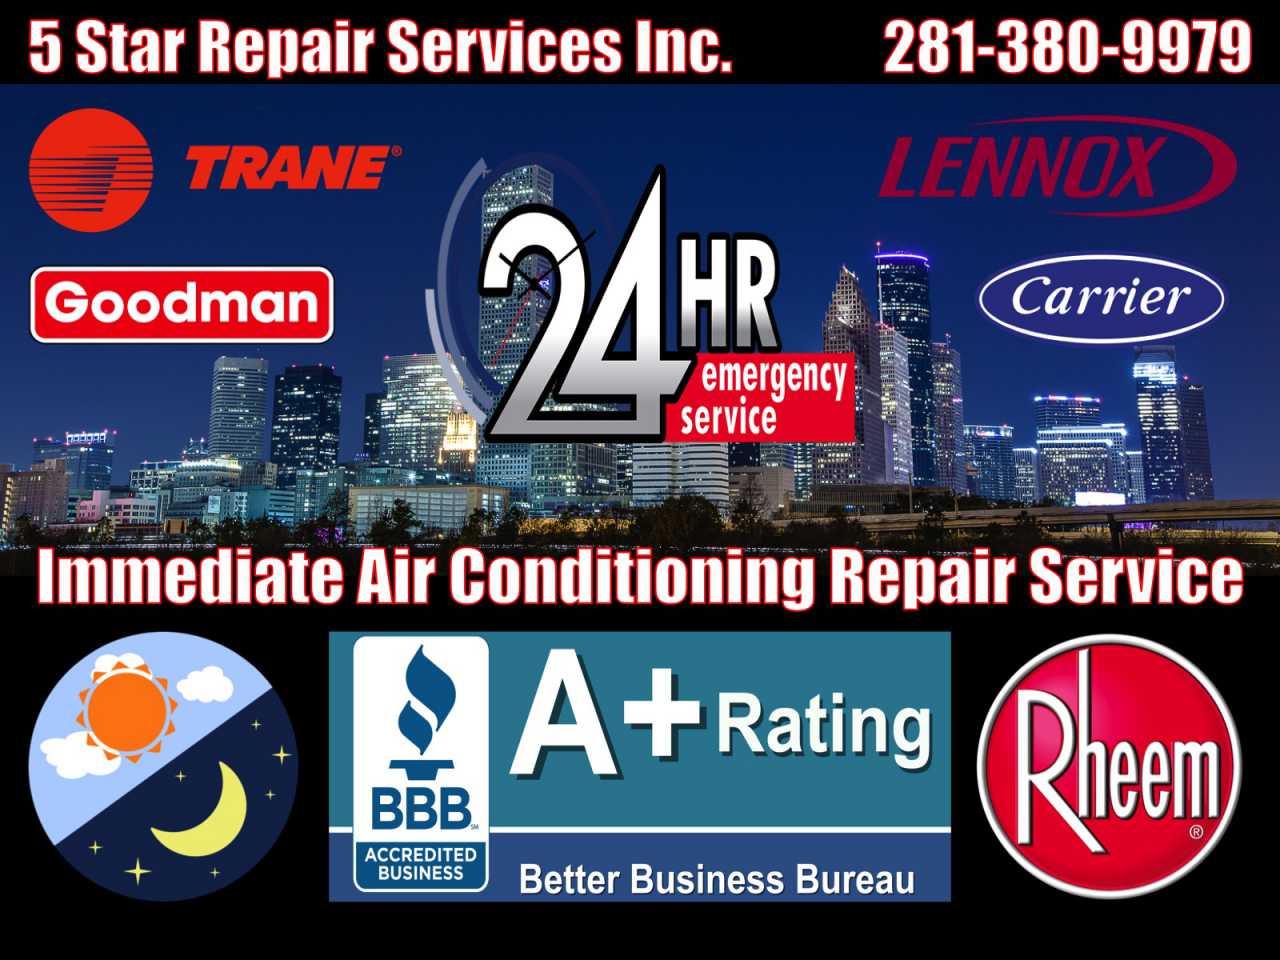 Best 24 Hour Emergency Air Conditioning AC HVAC Furnace Condition Repair Service Pasadena Houston 77015 77058 77059 77501 77502 77503 77504 77505 77506 77507 77508 77536 77586 Central Cooling Unit System Duct Cleaning Maintenance